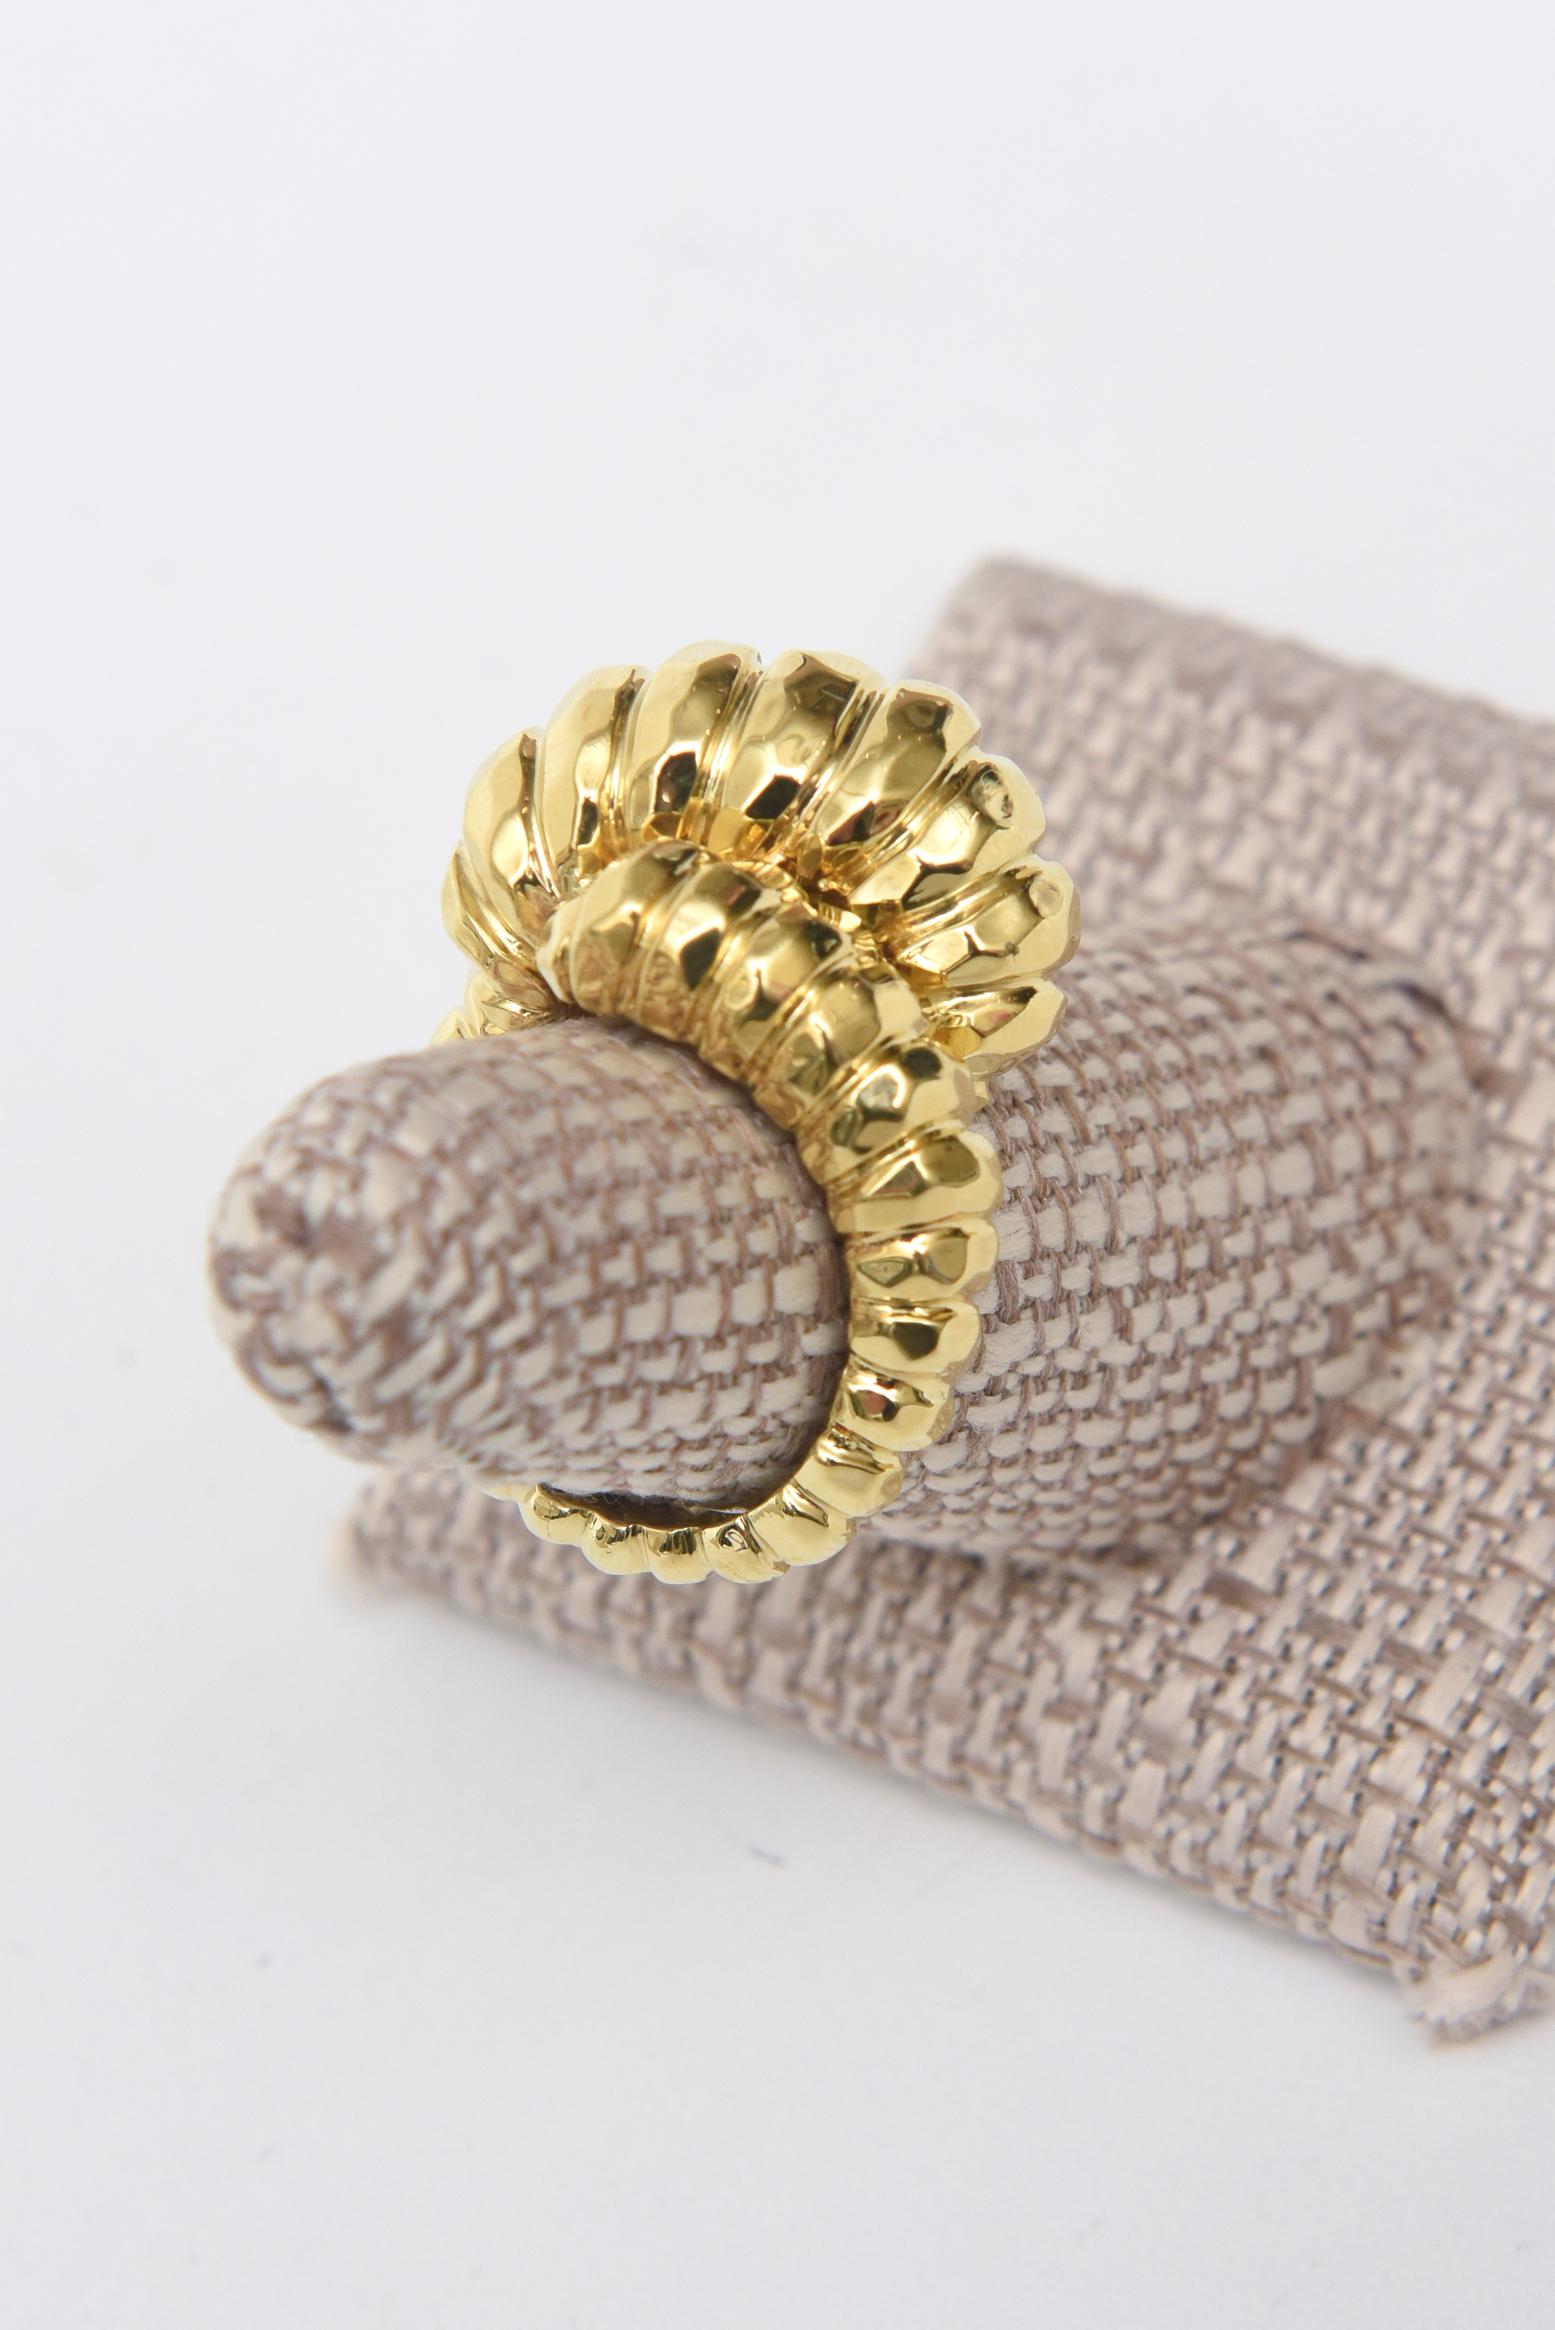 Henry Dunay Hand-Hammered 18 Karat Yellow Gold Ring In Good Condition For Sale In North Miami, FL